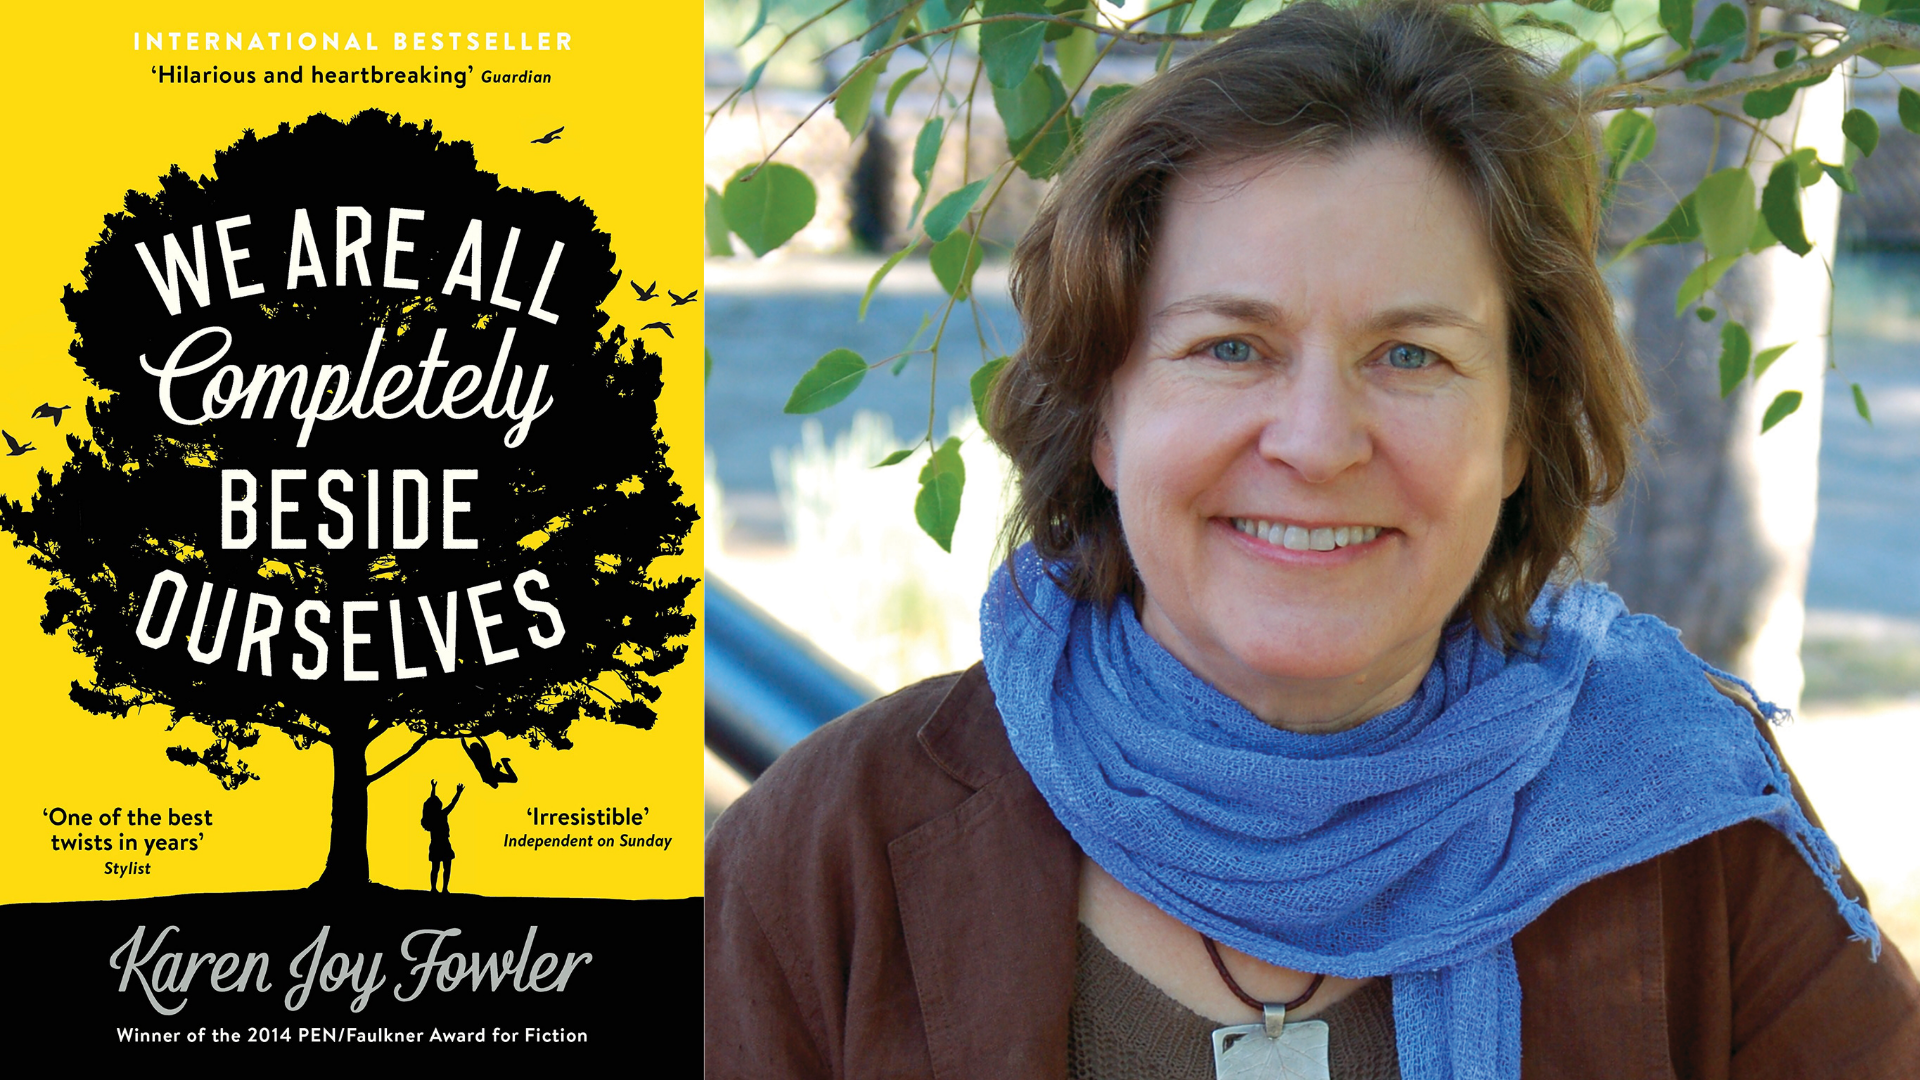 Book cover of 'We Are All Completely Beside Ourselves' and book author, Karen Joy Fowler. Image credit, Penguin Random House.